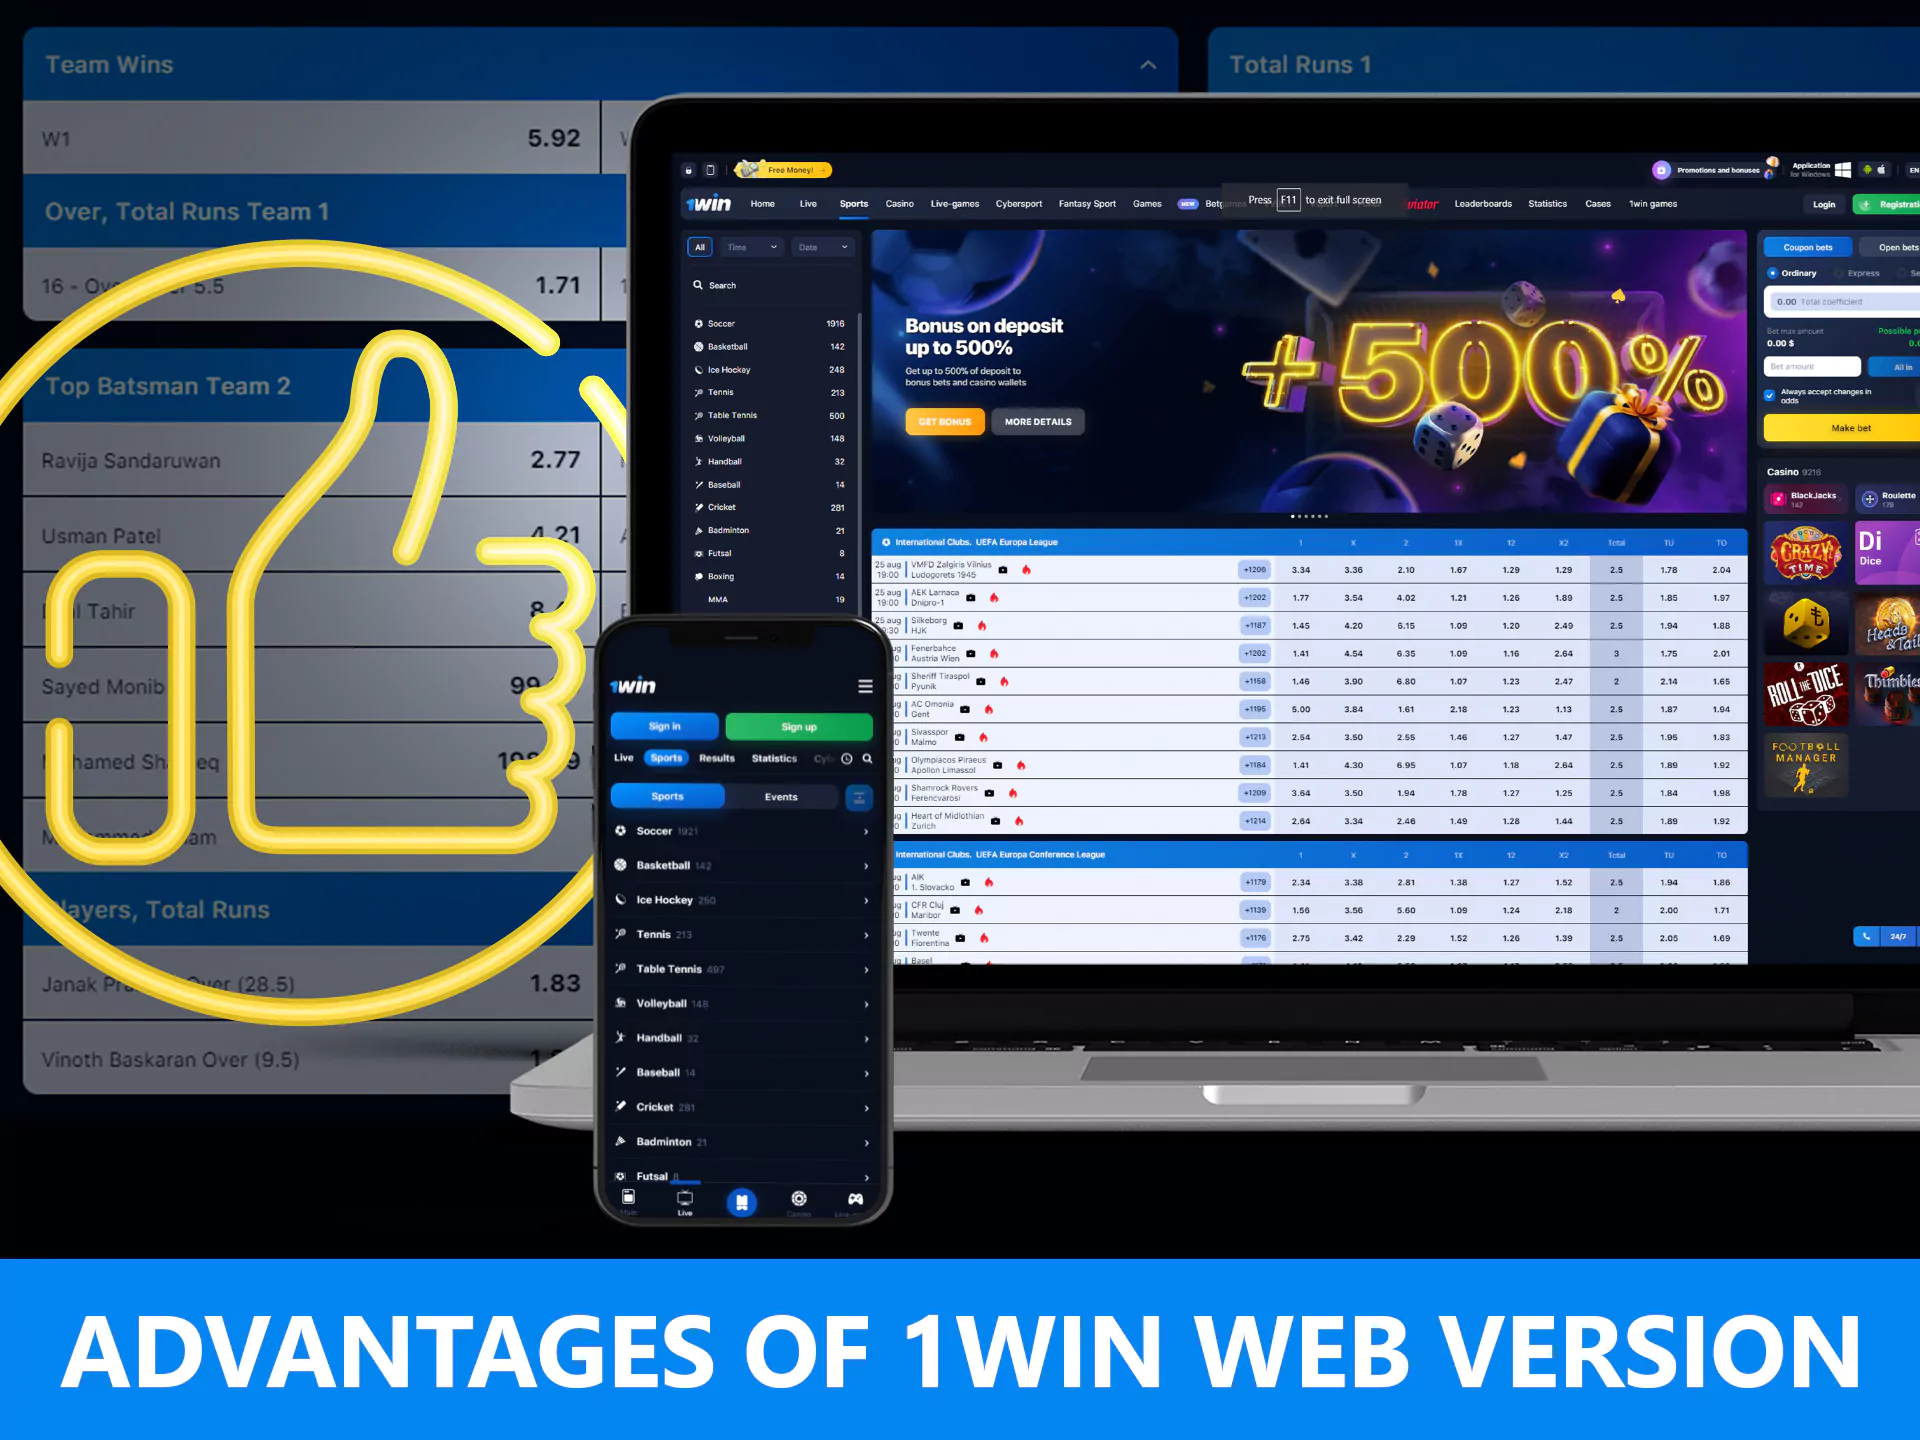 On the 1win website, you can place bets and play casino games without installing any clients.